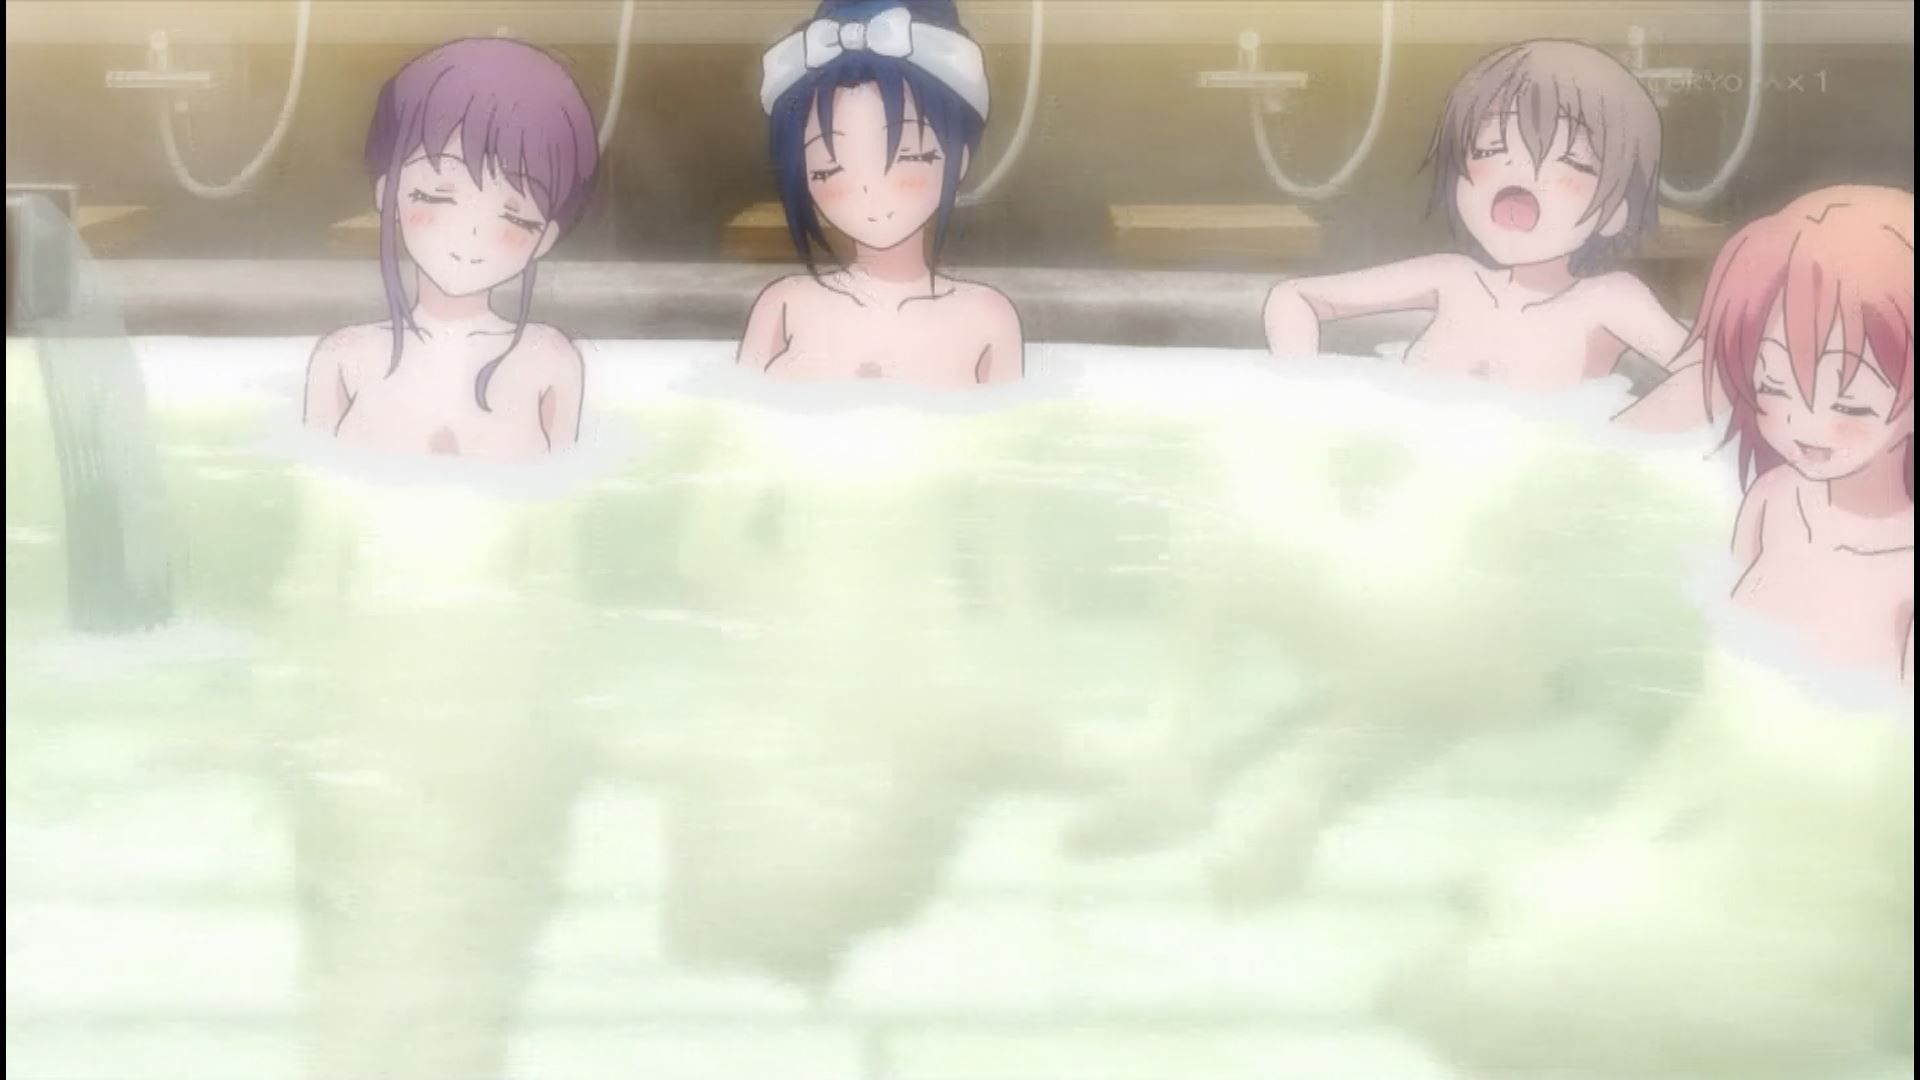 Anime [Armored Daughter Fighting Machine] 7 stories such as hot spring bathing scene where girls' nakedness is not glowing! 6